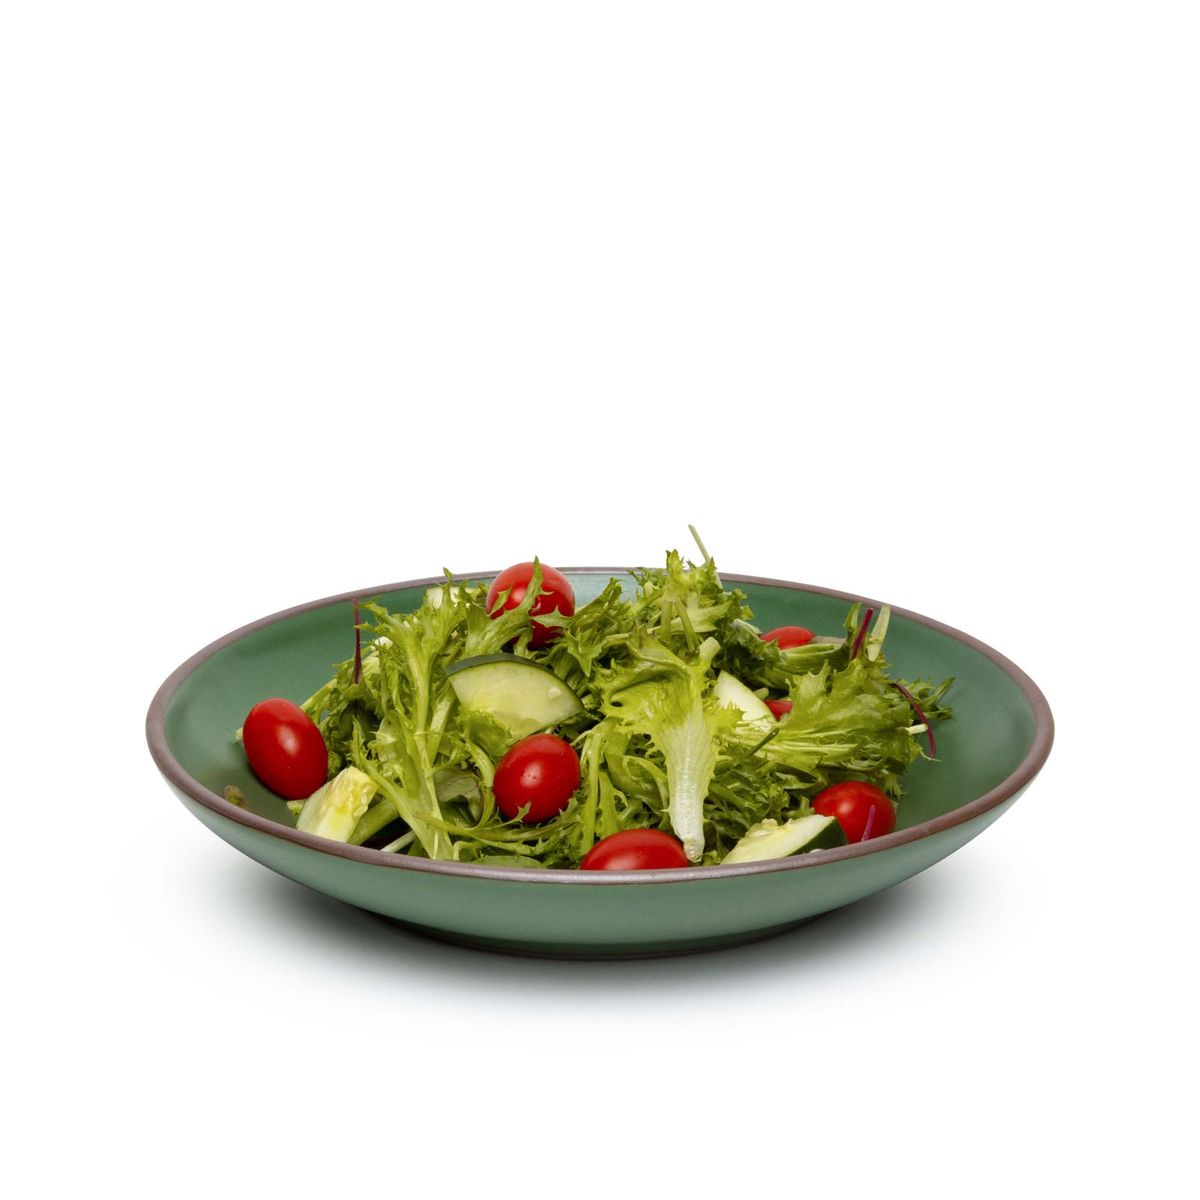 A large ceramic plate with a curved bowl edge in a deep, verdant green color featuring iron speckles and an unglazed rim, filled with salad.